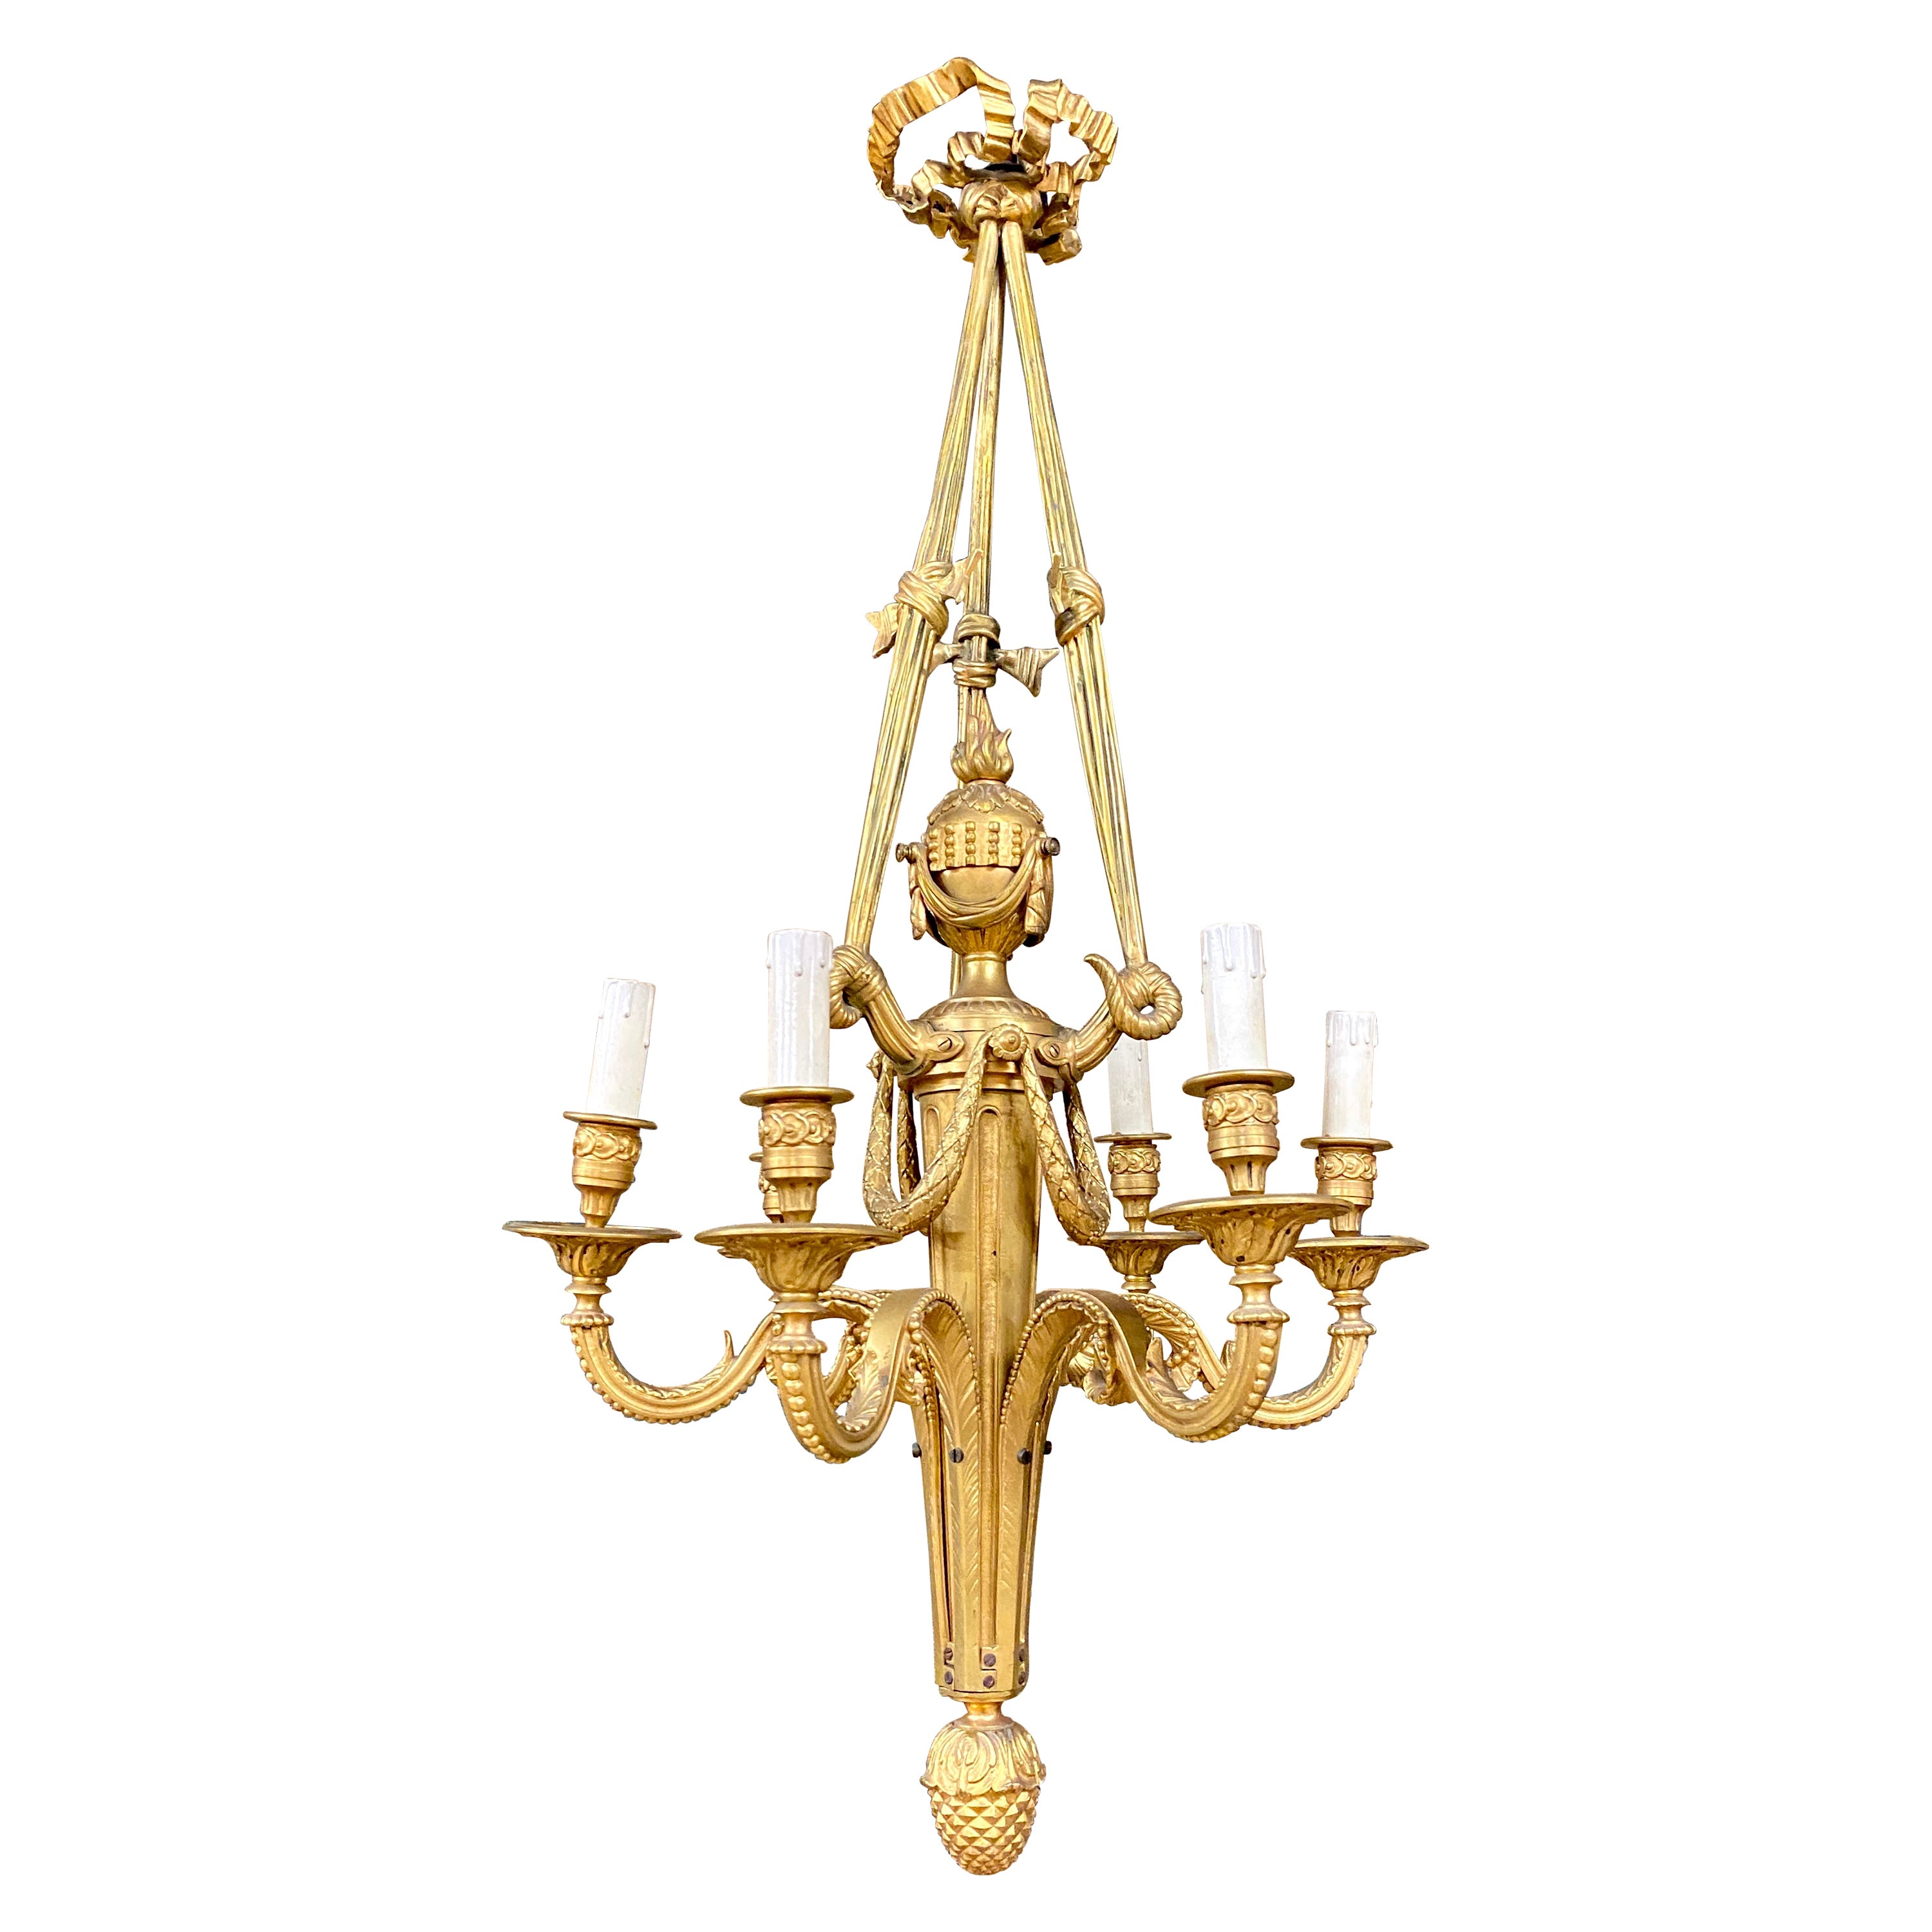 Louis XVI Style Gilt Bronze Chandelier With Six Arms Of Light. Period Late 19th 